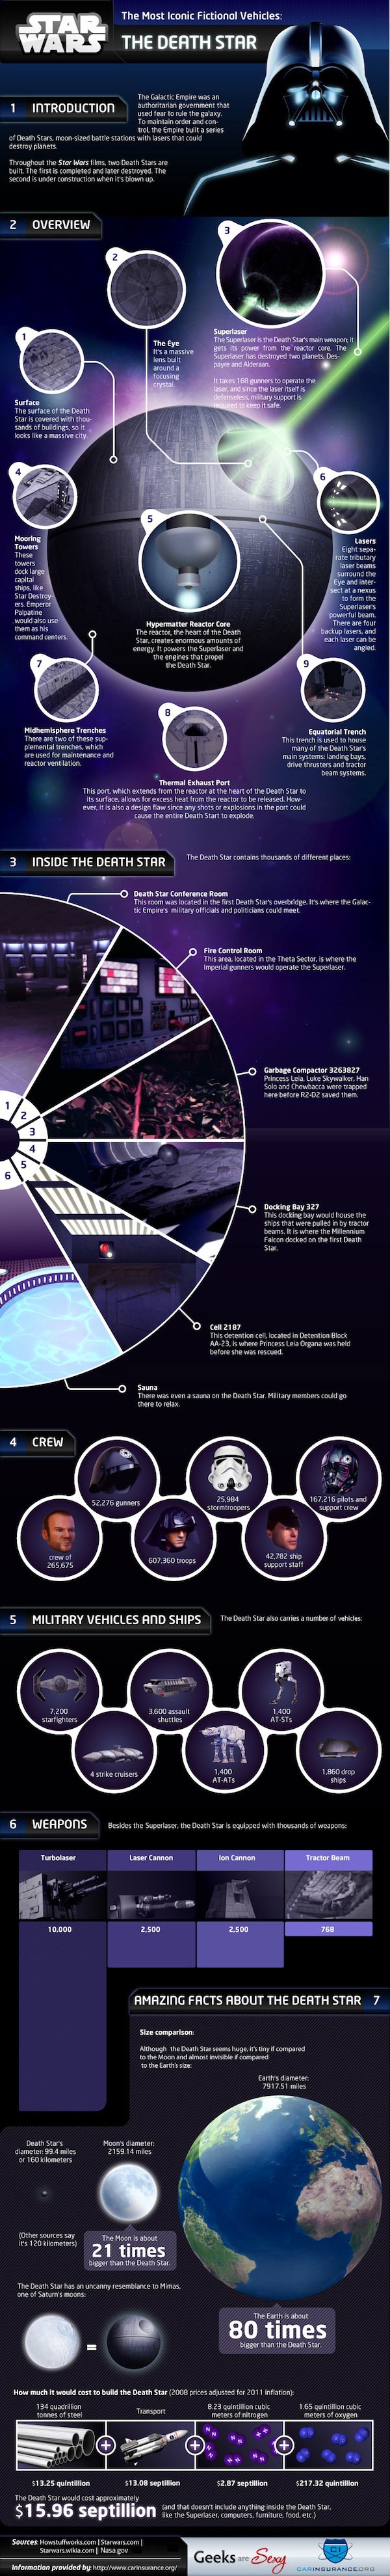 Star Wars: Every Possible Fact About The Death Star [Infographic]